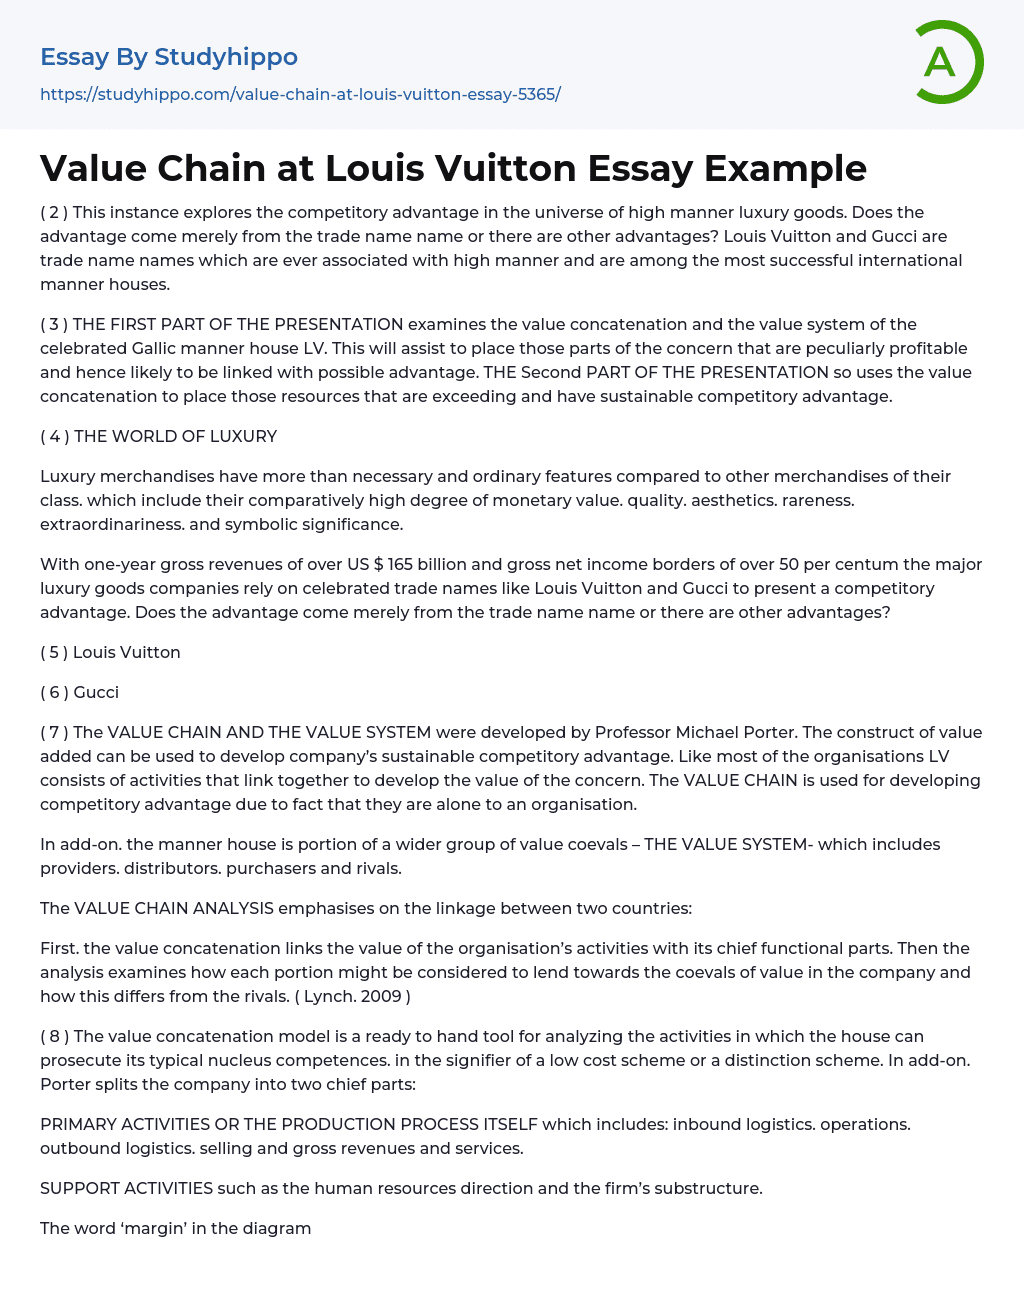 Value Chain at Louis Vuitton Essay Example